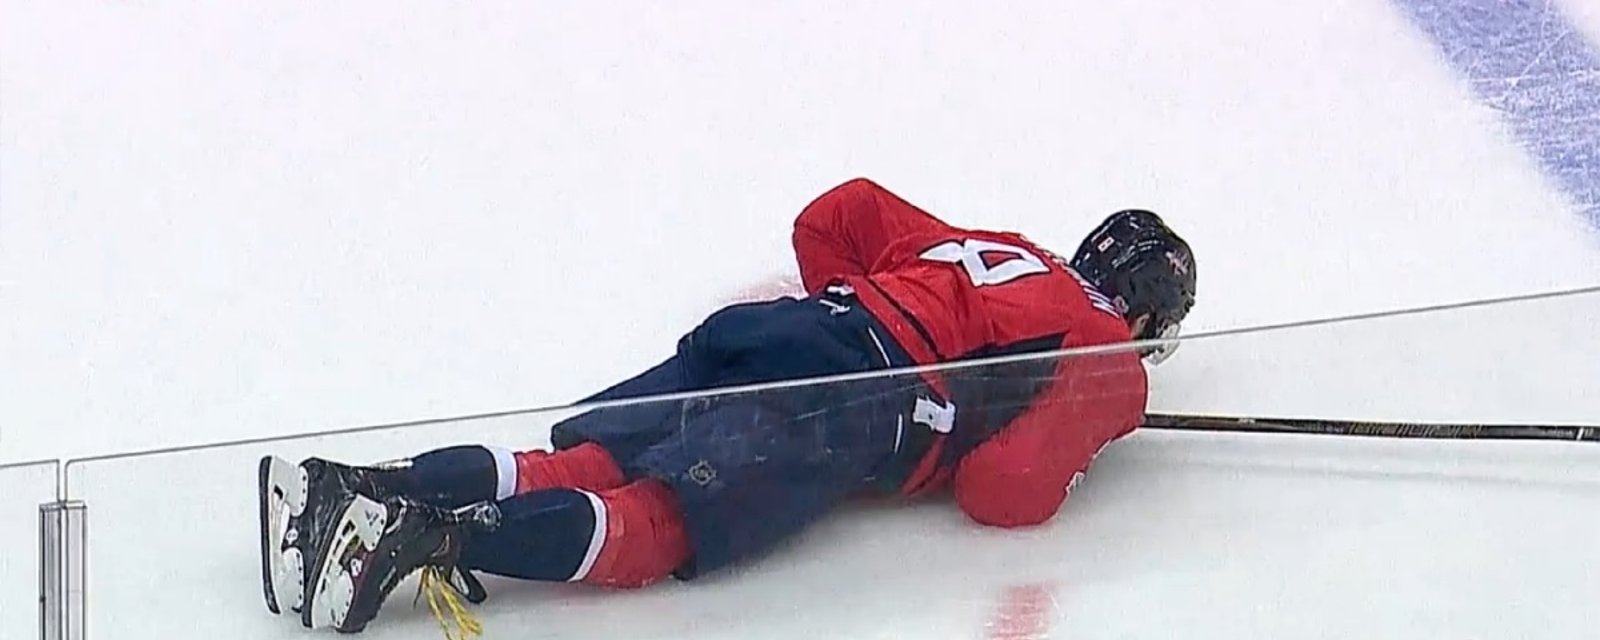 Breaking: Alex OVechkin appears to have been seriously injured.